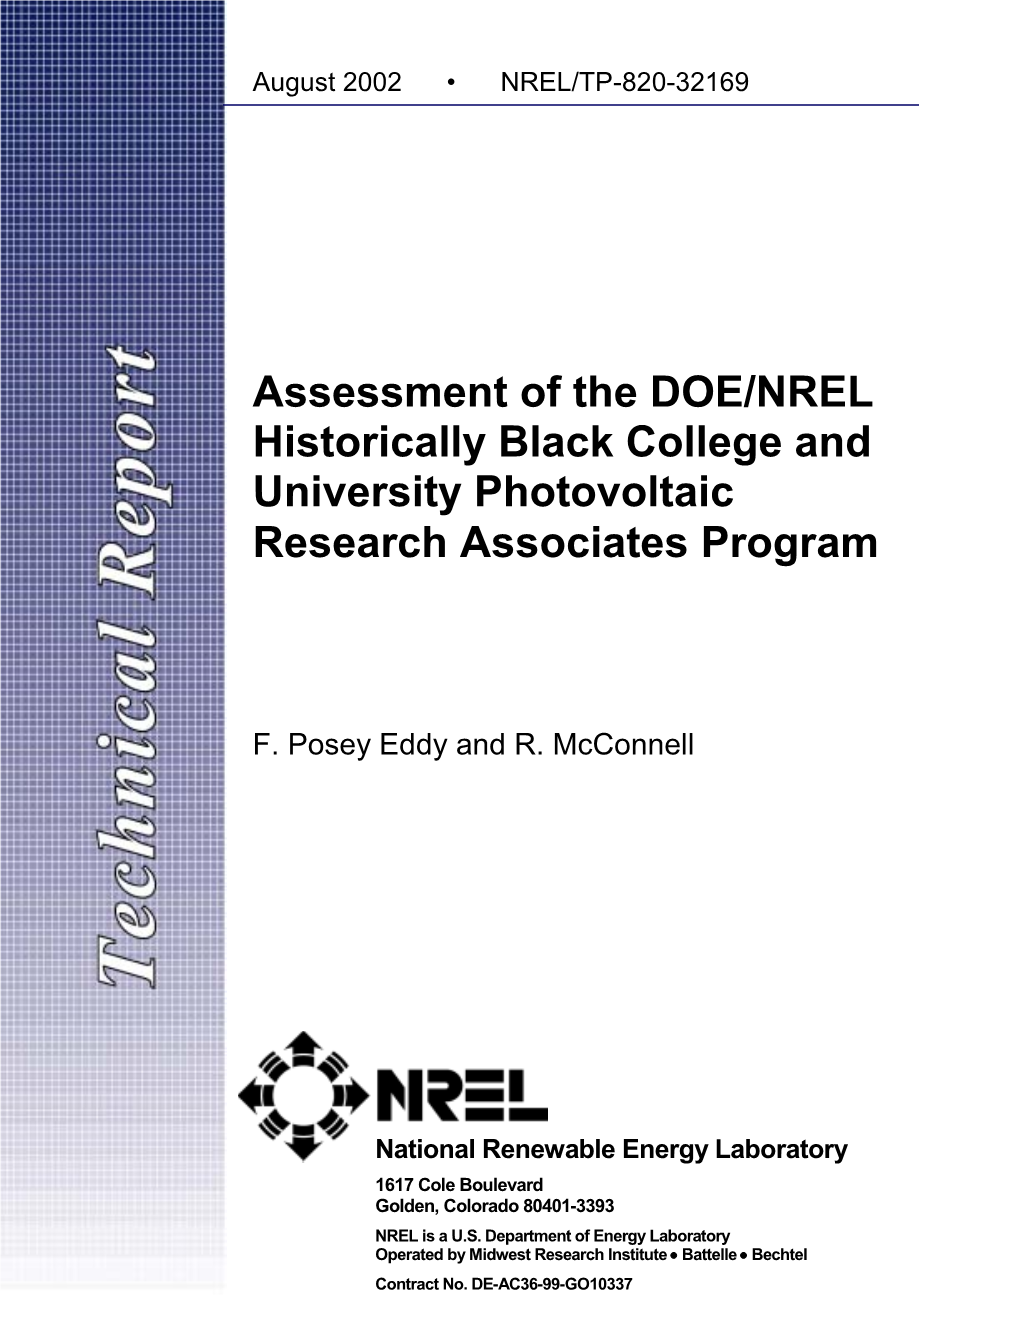 Assessment of the DOE/NREL Historically Black College and University Photovoltaic Research Associates Program